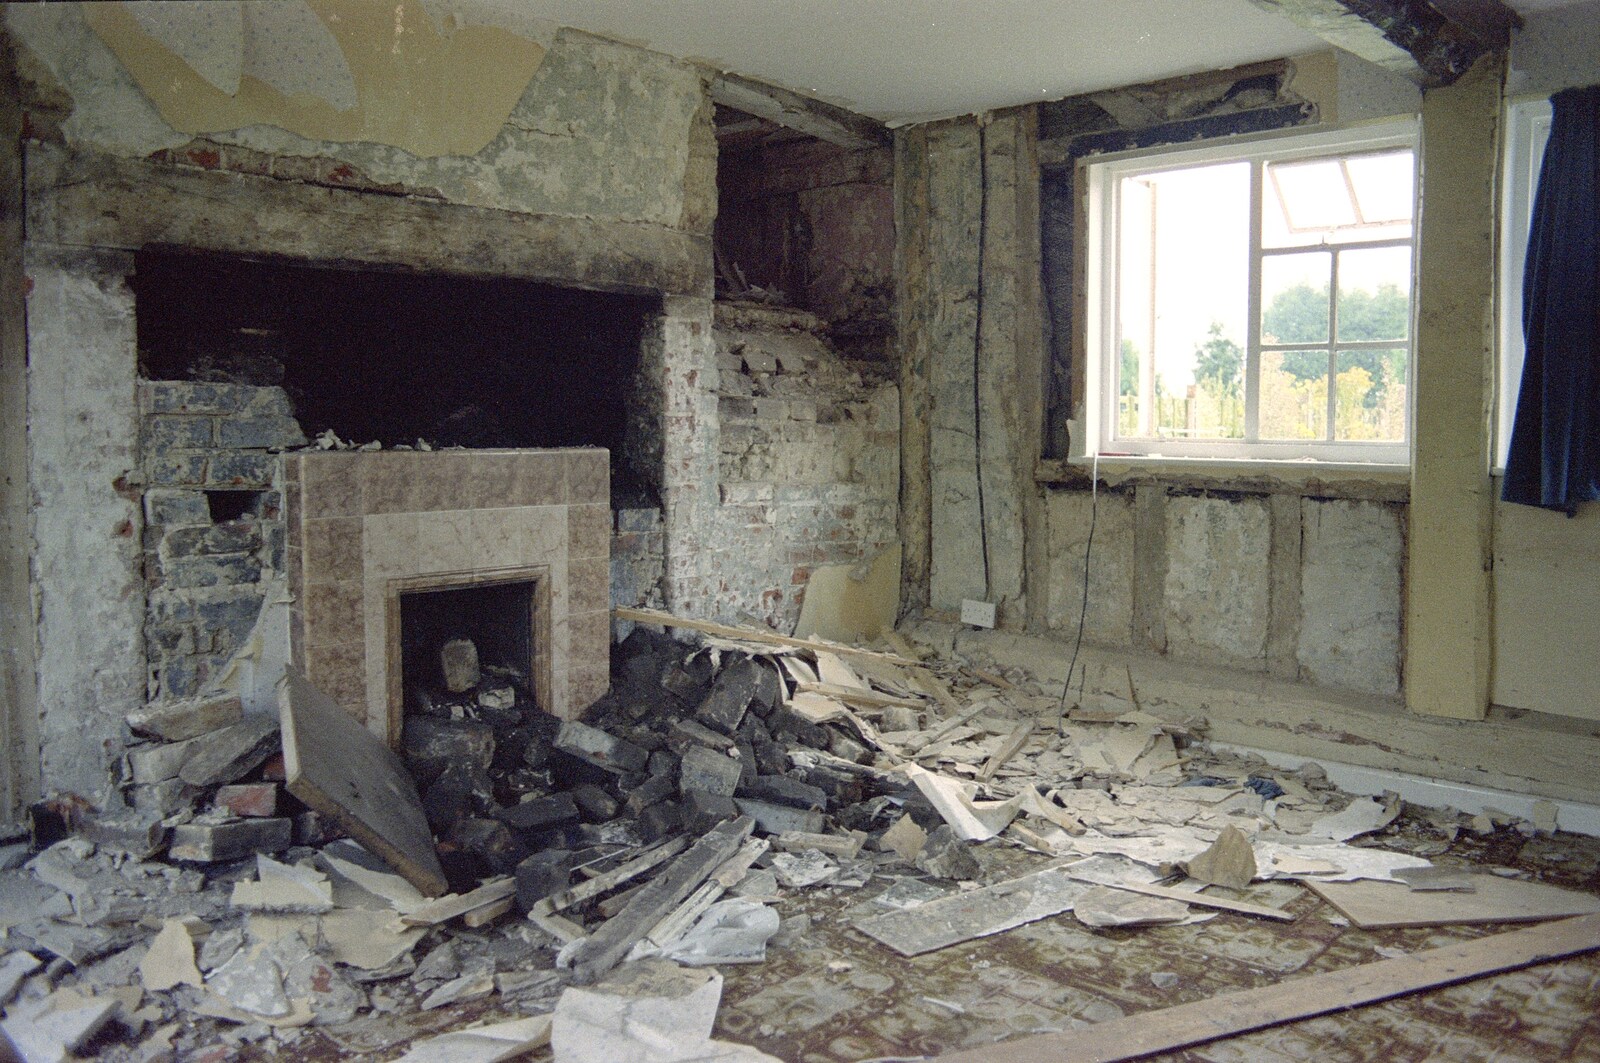 The original inglenook fireplace is found from Moving In, Brome, Suffolk - 10th April 1994